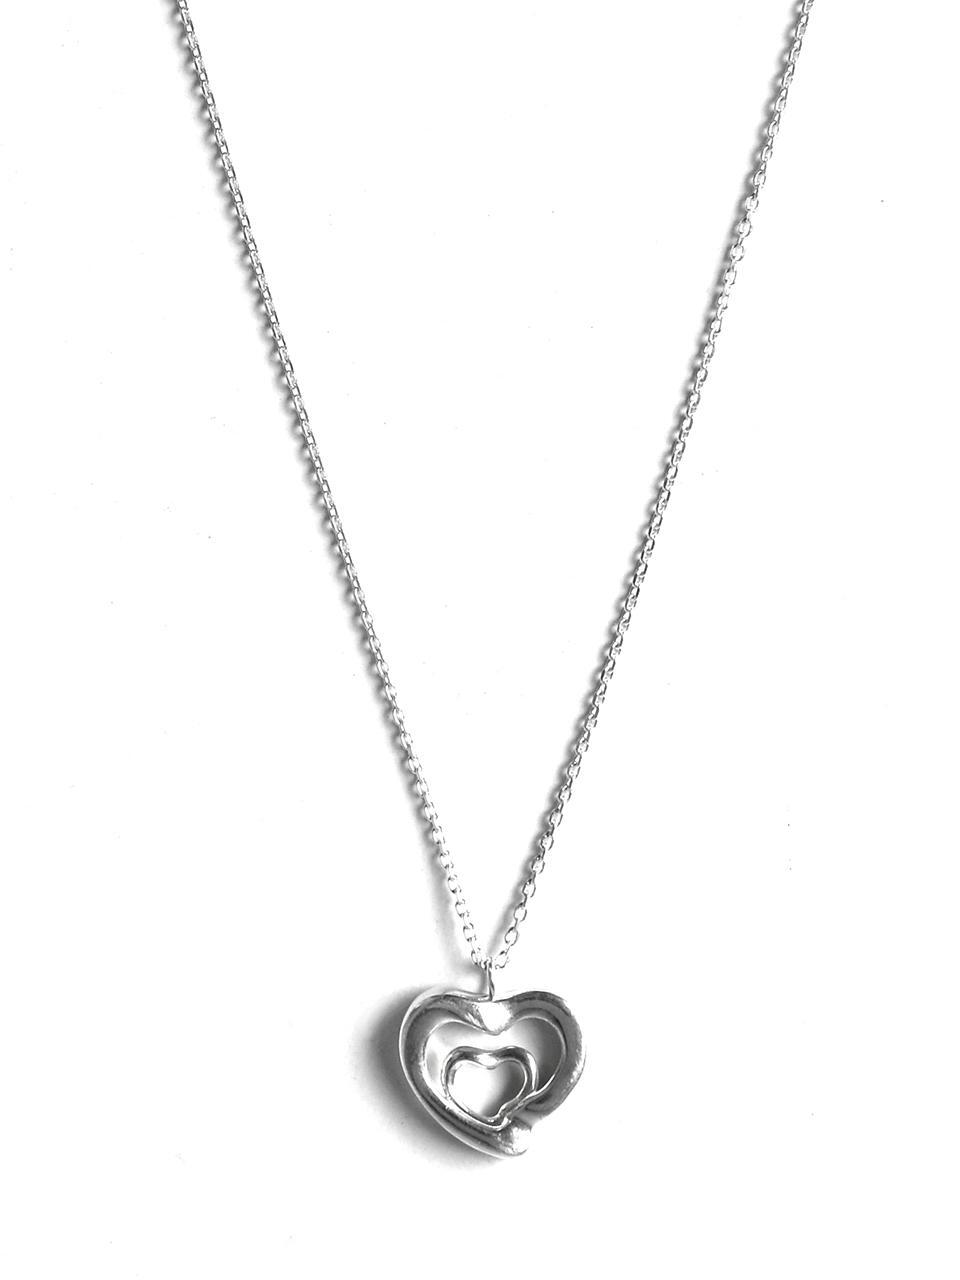 [Siver925] WE027 double heart necklace